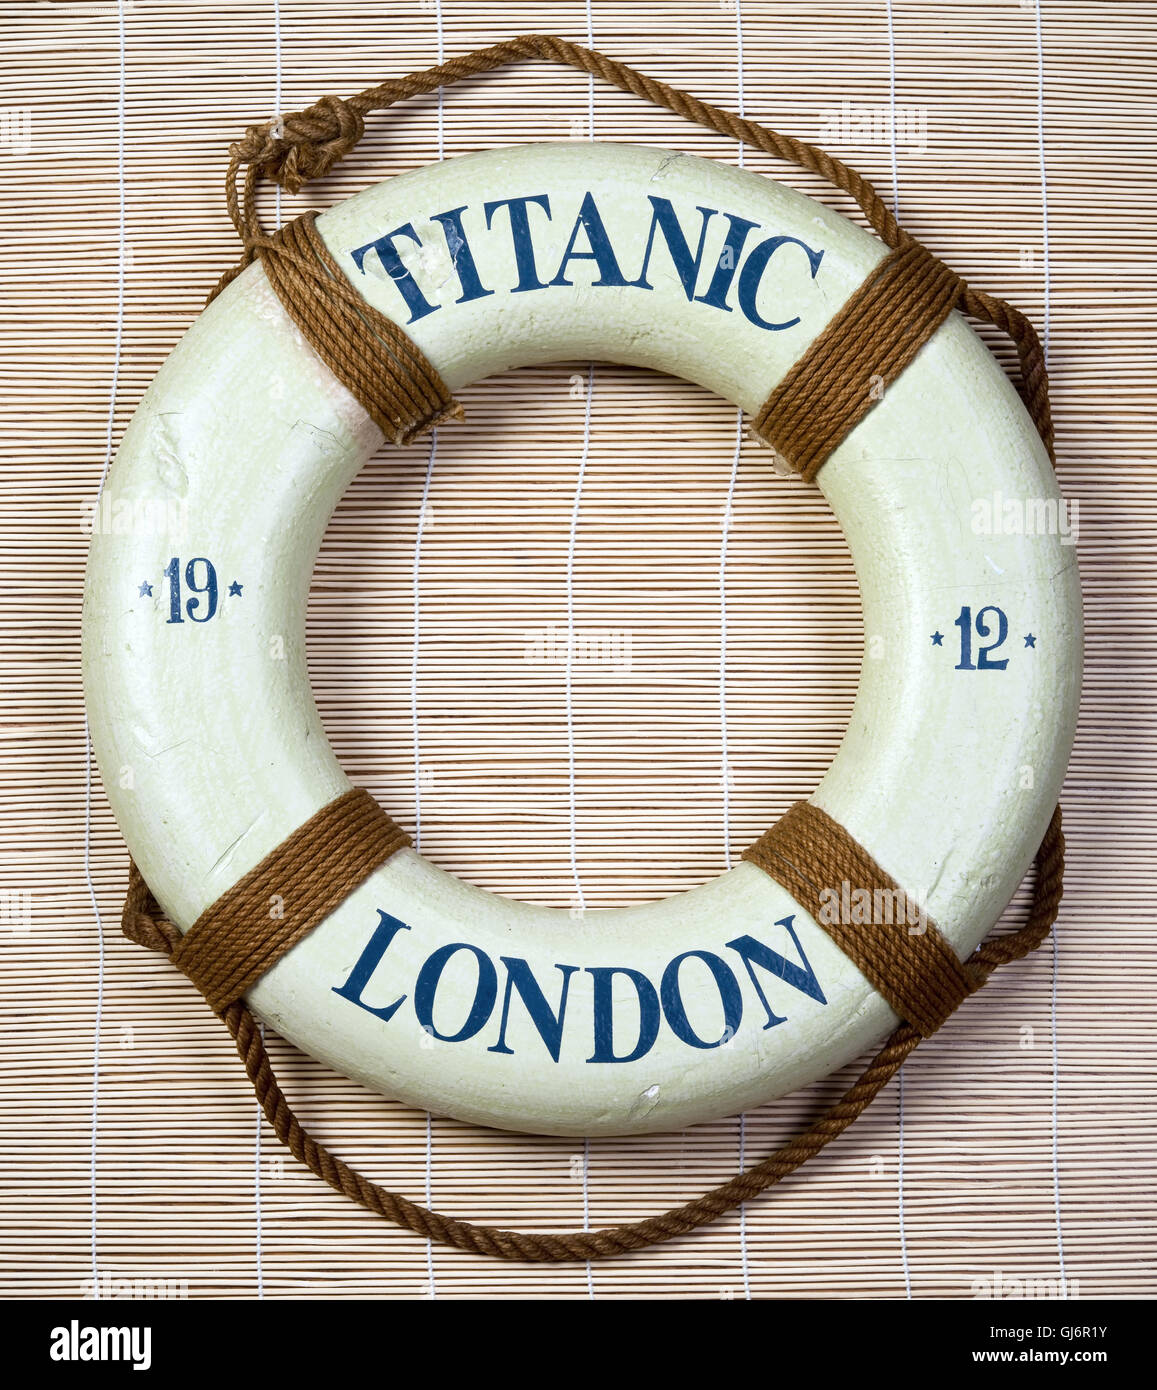 Titanic lifesaver with London on it and date of 1912. Stock Photo